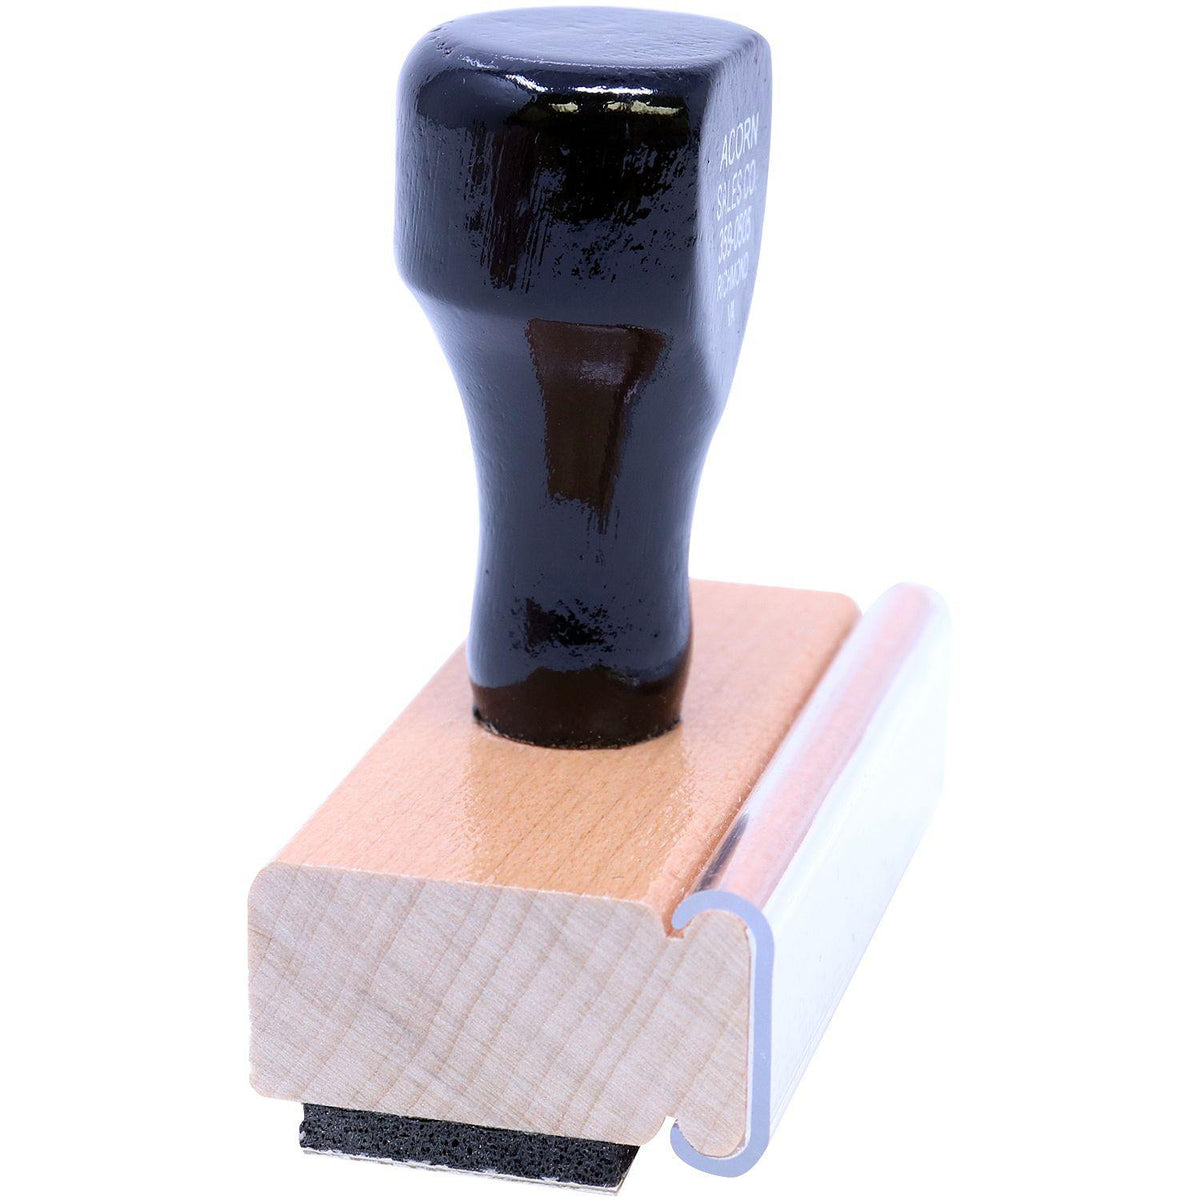 Side View of Thank You with Smiley Rubber Stamp at an Angle